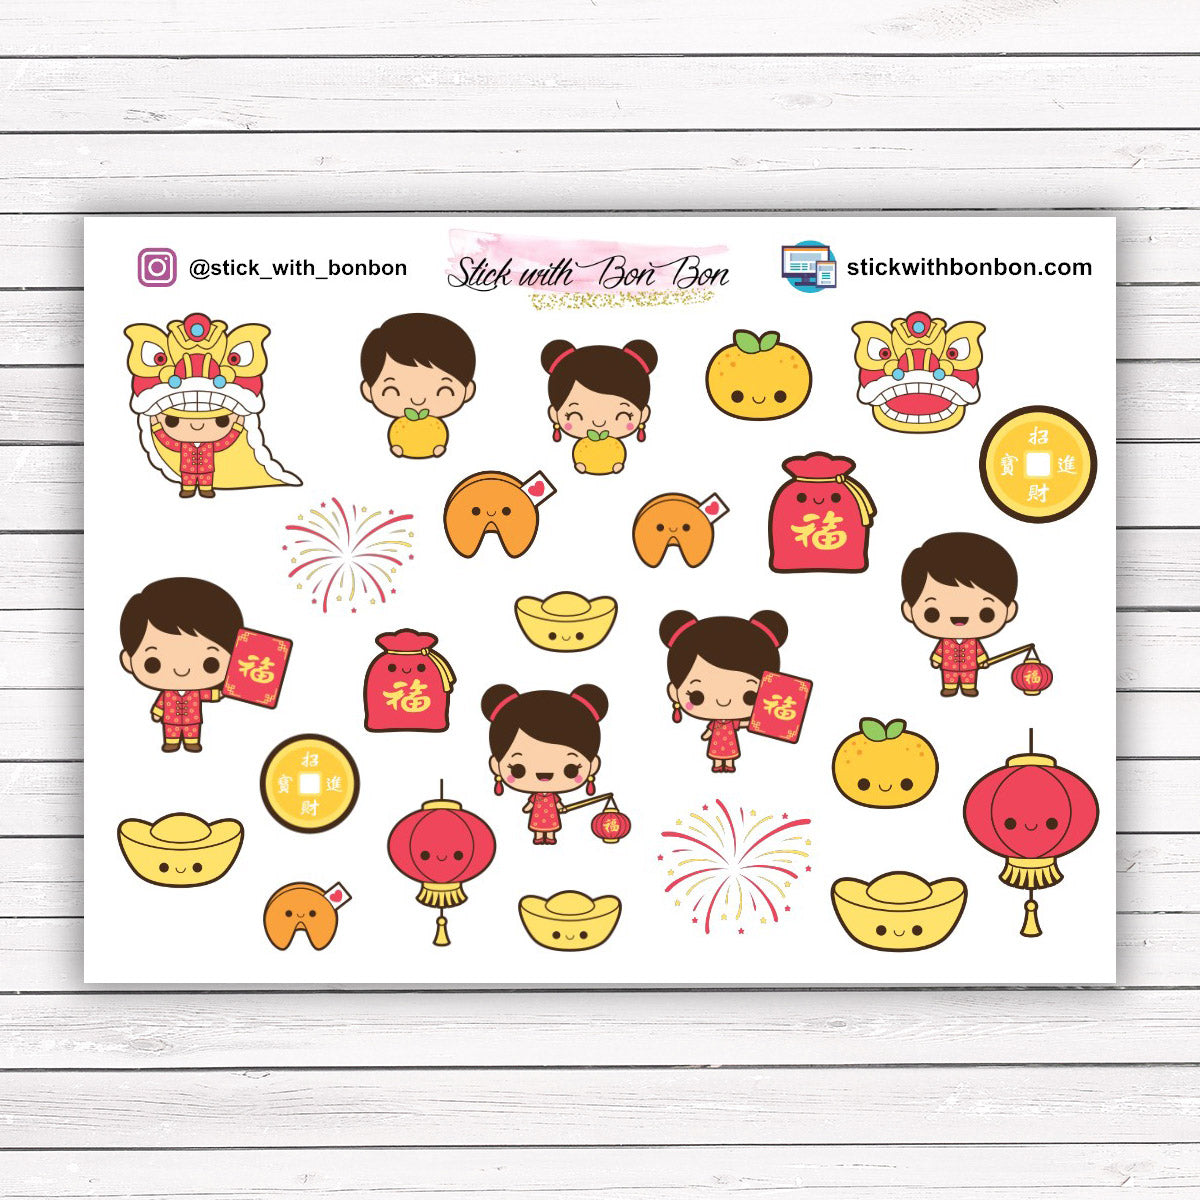 New Year Deco Stickers